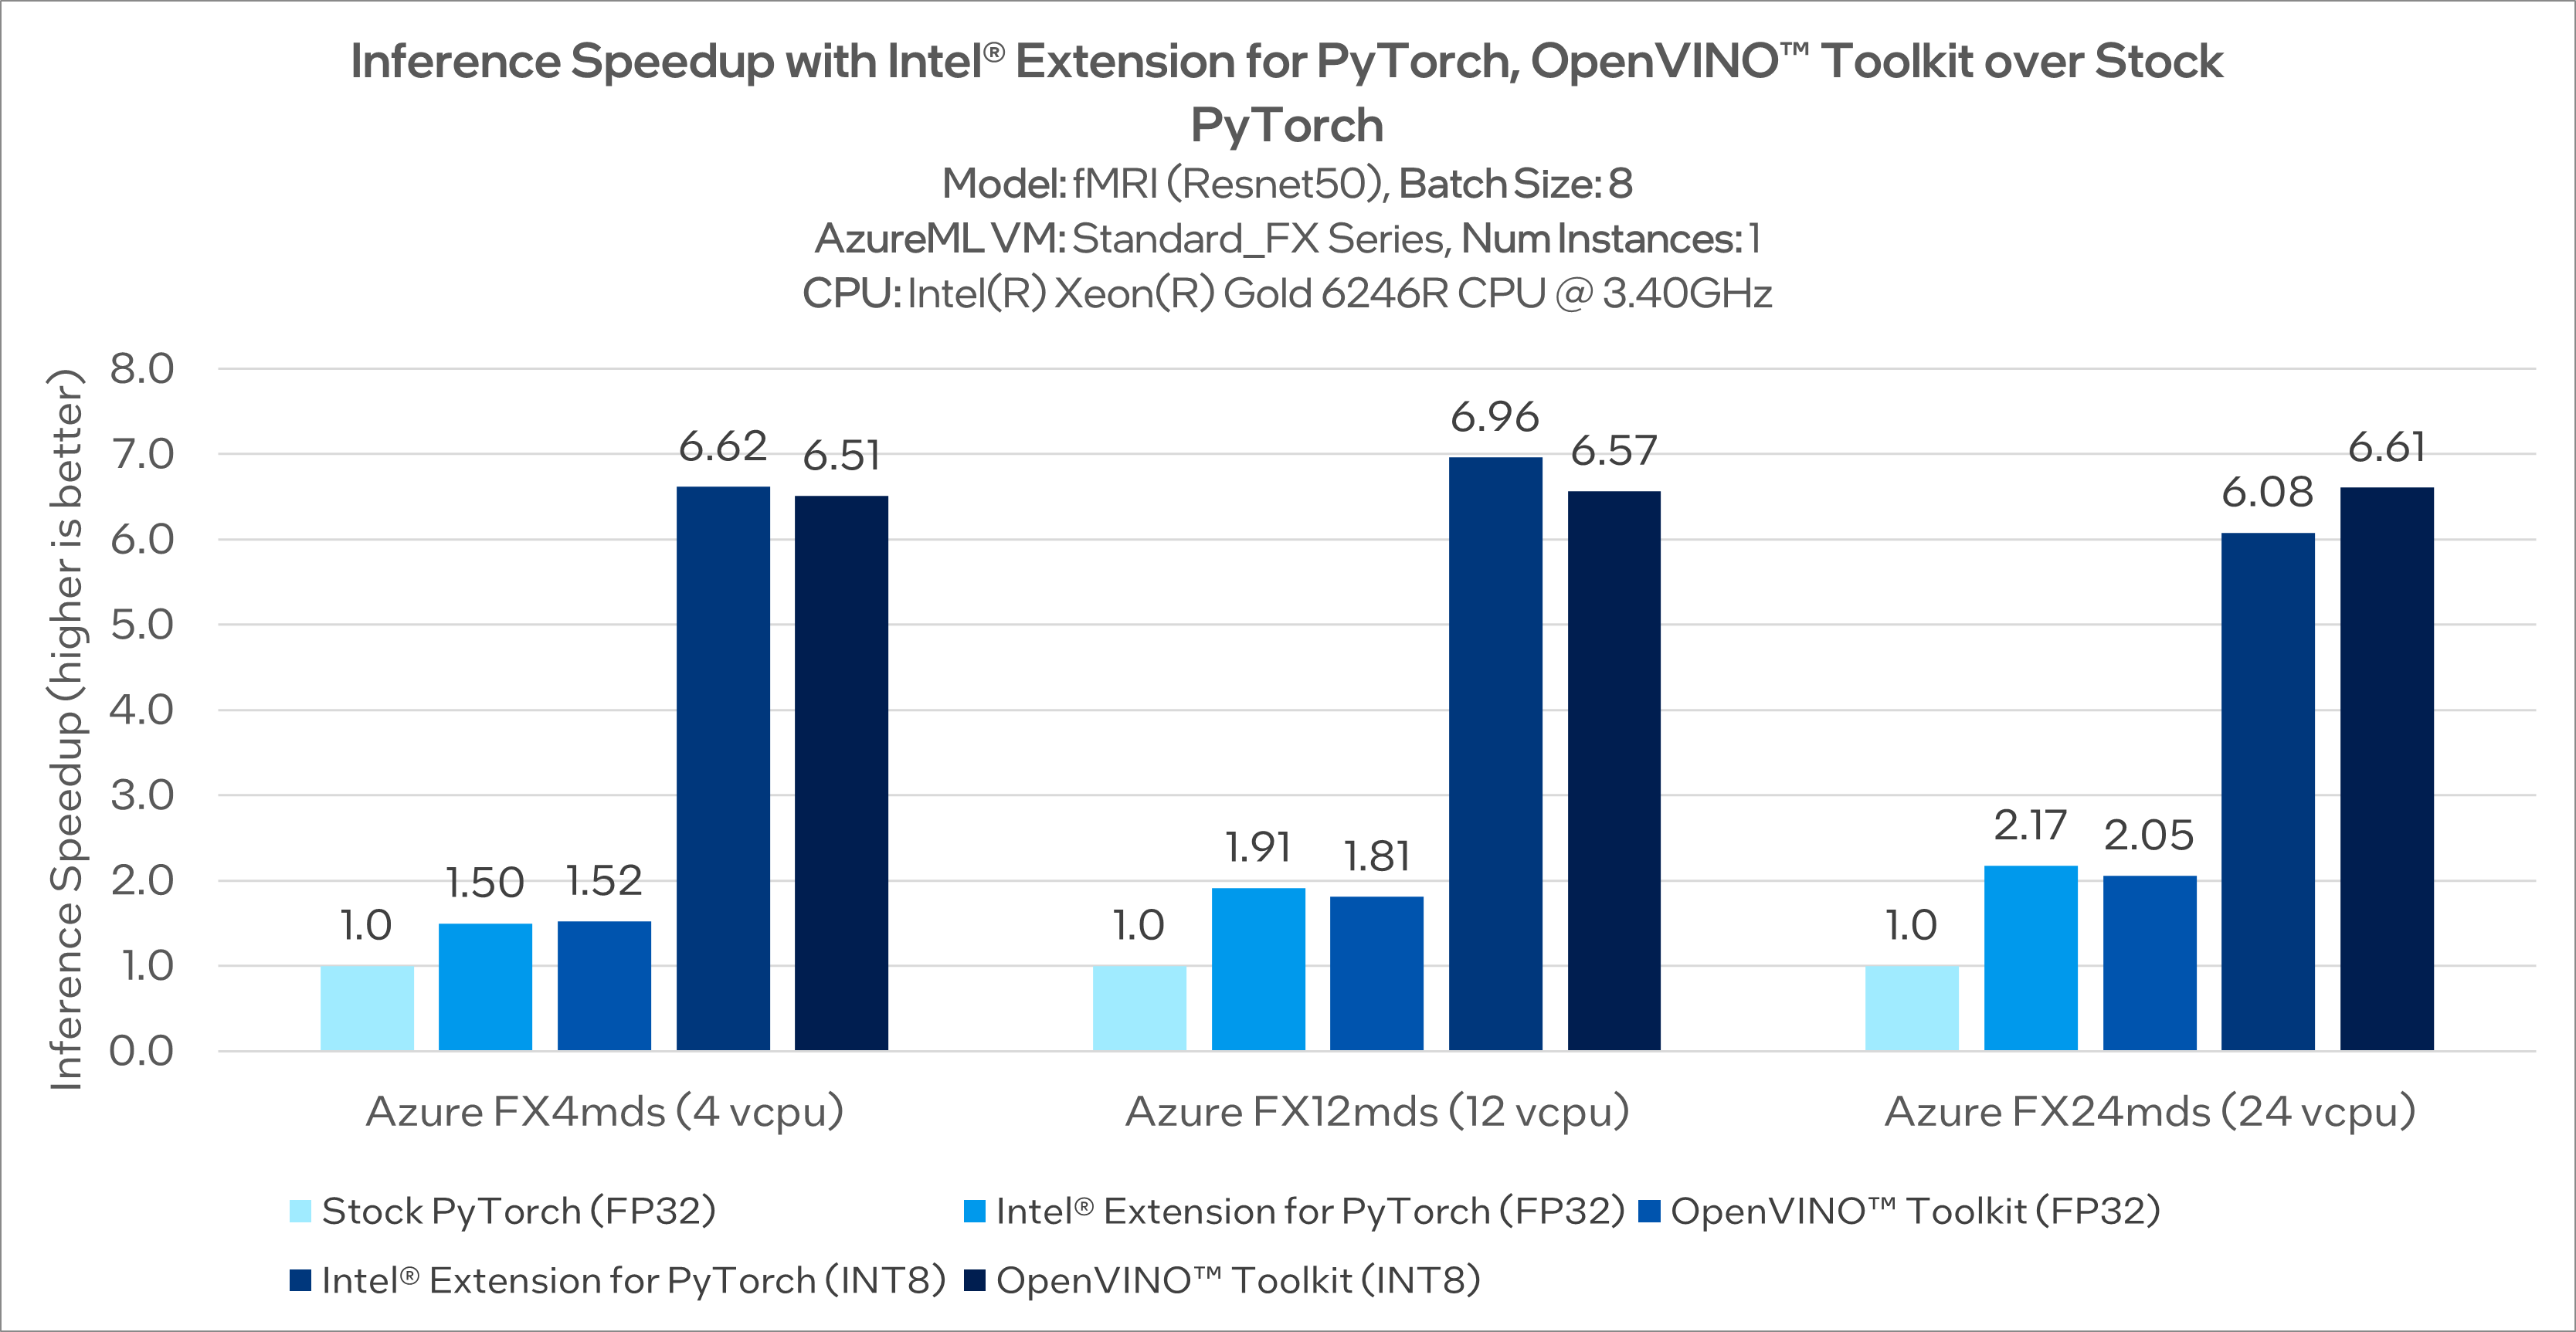 bar chart showing inference speedup with stock pytorch, Intel Extension for pytorch and openvino toolkit